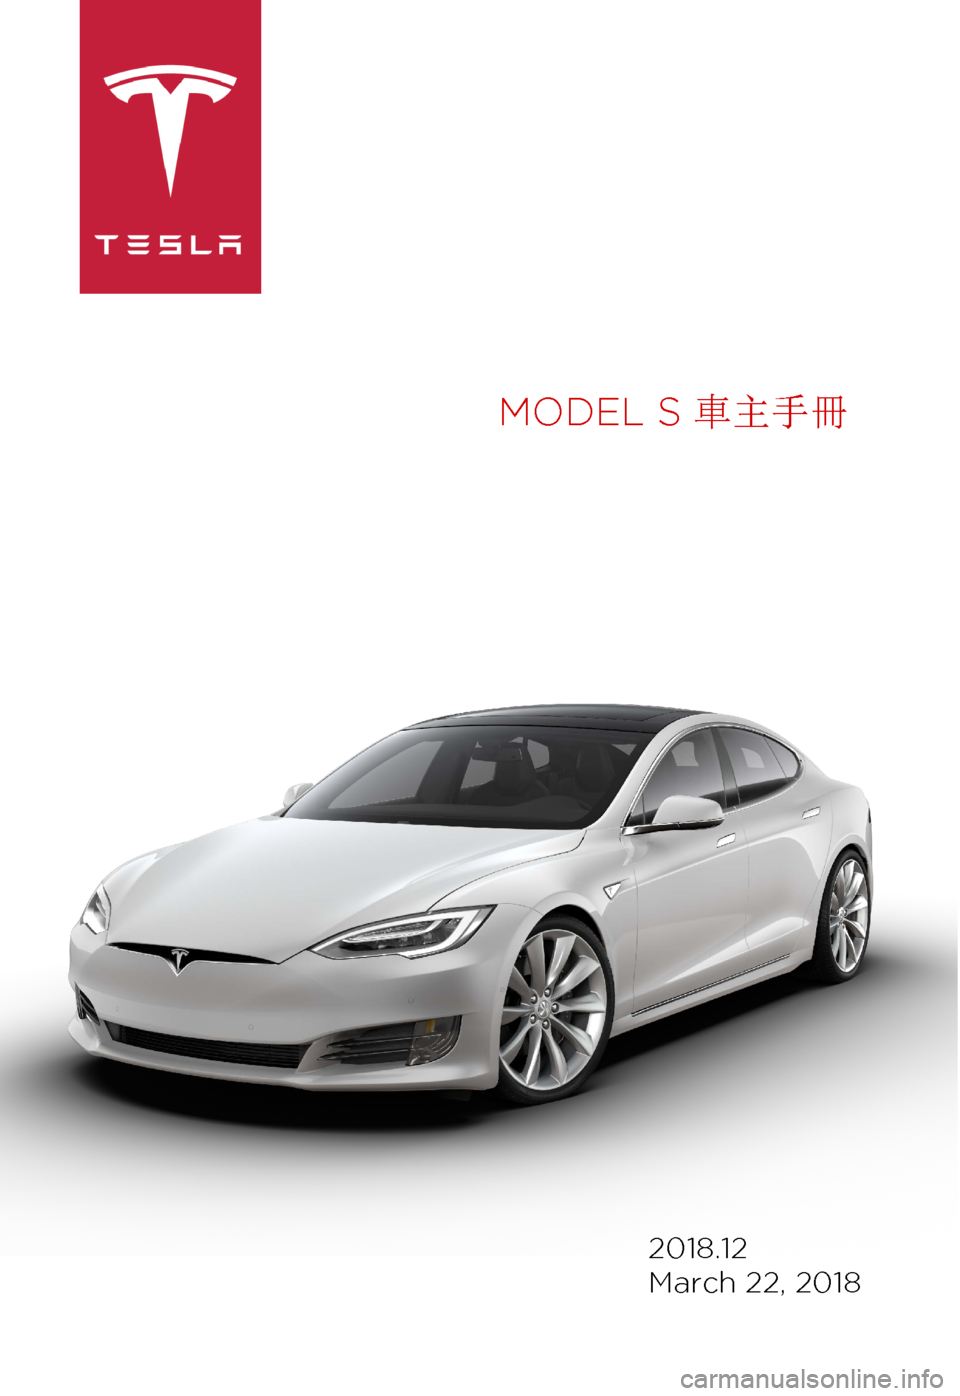 TESLA MODEL S 2018  車主手冊 (in Chinese Traditional) MODEL 
S 車主手冊 2018.12 
M arch 
22, 2018 